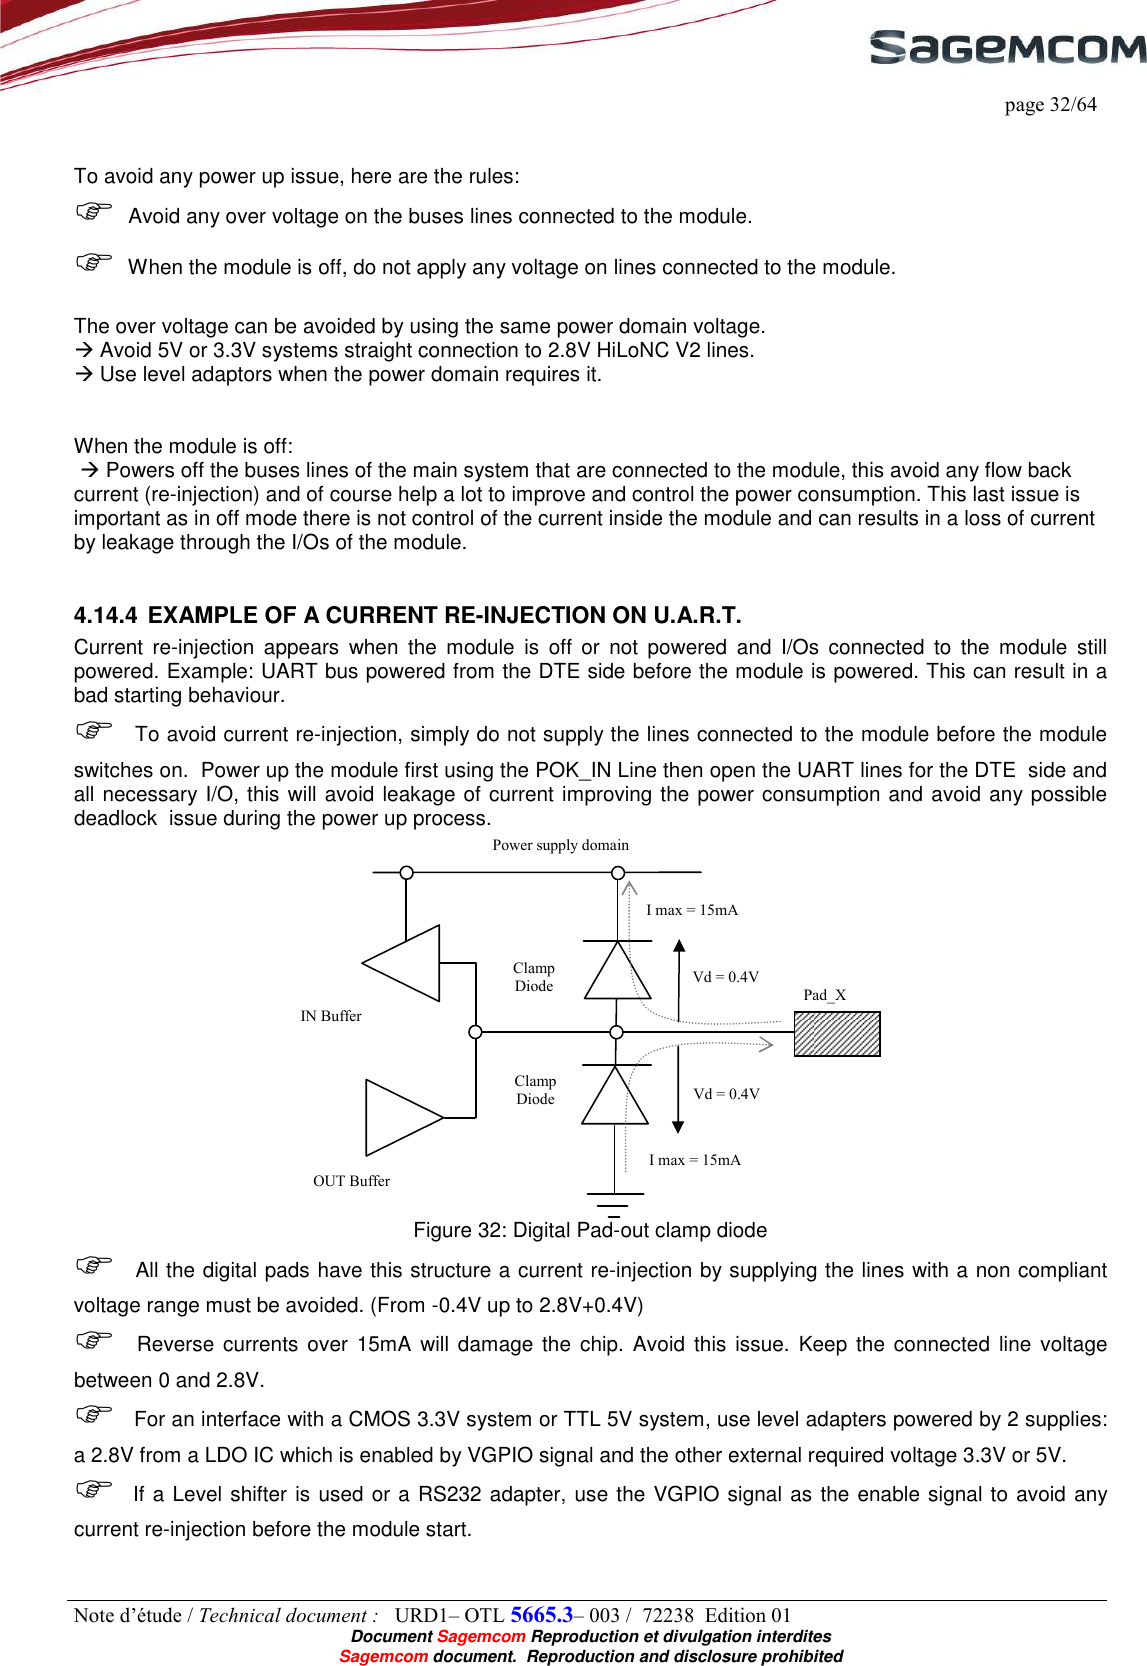     page 32/64 Note d’étude / Technical document :   URD1– OTL 5665.3– 003 /  72238  Edition 01  Document Sagemcom Reproduction et divulgation interdites Sagemcom document.  Reproduction and disclosure prohibited   To avoid any power up issue, here are the rules:  Avoid any over voltage on the buses lines connected to the module.  When the module is off, do not apply any voltage on lines connected to the module.  The over voltage can be avoided by using the same power domain voltage.  Avoid 5V or 3.3V systems straight connection to 2.8V HiLoNC V2 lines.  Use level adaptors when the power domain requires it.   When the module is off:   Powers off the buses lines of the main system that are connected to the module, this avoid any flow back current (re-injection) and of course help a lot to improve and control the power consumption. This last issue is important as in off mode there is not control of the current inside the module and can results in a loss of current by leakage through the I/Os of the module.  4.14.4 EXAMPLE OF A CURRENT RE-INJECTION ON U.A.R.T. Current  re-injection  appears  when  the  module  is  off  or  not  powered  and  I/Os  connected  to  the  module  still powered. Example: UART bus powered from the DTE side before the module is powered. This can result in a bad starting behaviour.  To avoid current re-injection, simply do not supply the lines connected to the module before the module switches on.  Power up the module first using the POK_IN Line then open the UART lines for the DTE  side and all necessary I/O, this will avoid leakage of current improving the power consumption and avoid any possible deadlock  issue during the power up process.  Figure 32: Digital Pad-out clamp diode  All the digital pads have this structure a current re-injection by supplying the lines with a non compliant voltage range must be avoided. (From -0.4V up to 2.8V+0.4V)  Reverse  currents  over 15mA  will  damage  the  chip.  Avoid this issue.  Keep the connected  line voltage between 0 and 2.8V.  For an interface with a CMOS 3.3V system or TTL 5V system, use level adapters powered by 2 supplies: a 2.8V from a LDO IC which is enabled by VGPIO signal and the other external required voltage 3.3V or 5V.   If a Level shifter is used or a RS232 adapter, use the VGPIO signal as the enable signal to avoid any current re-injection before the module start. Power supply domain Pad_X IN Buffer  OUT Buffer Vd = 0.4V Vd = 0.4V I max = 15mA I max = 15mA Clamp Diode Clamp Diode 